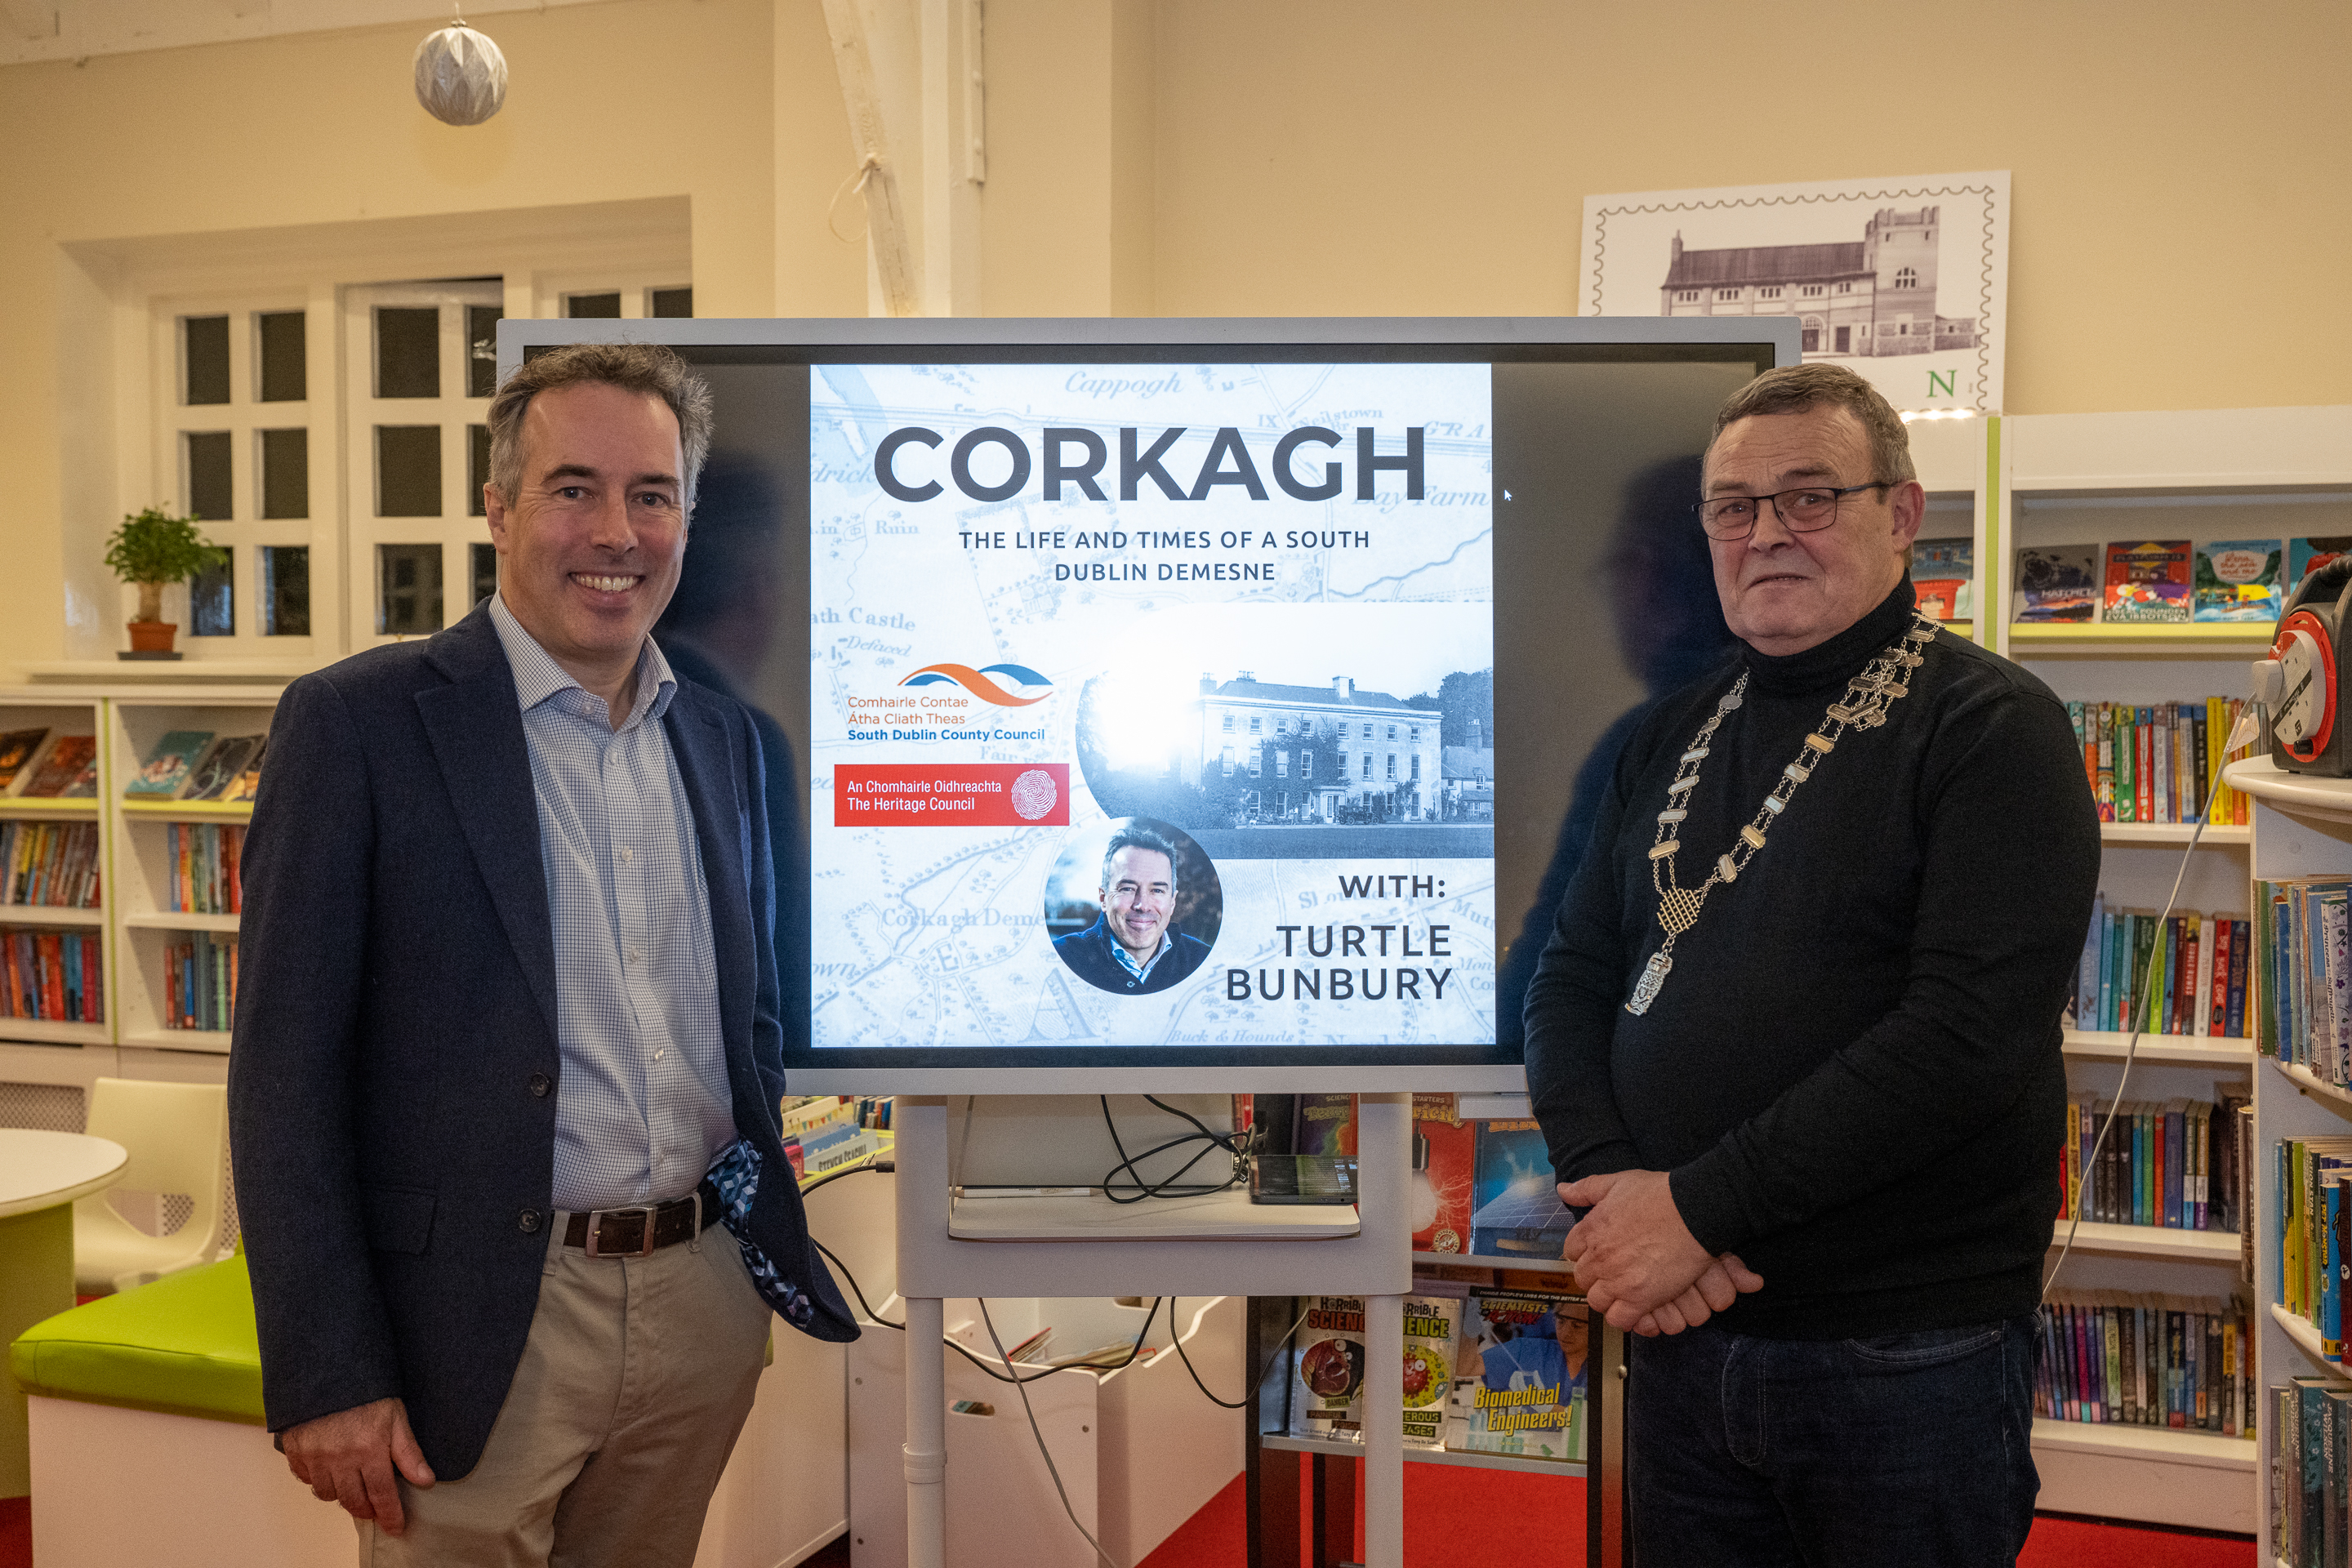 Turtle Bunbry and Cllr. William Carey at the launch of the Corkagh Podcast at Clondalkin Library.